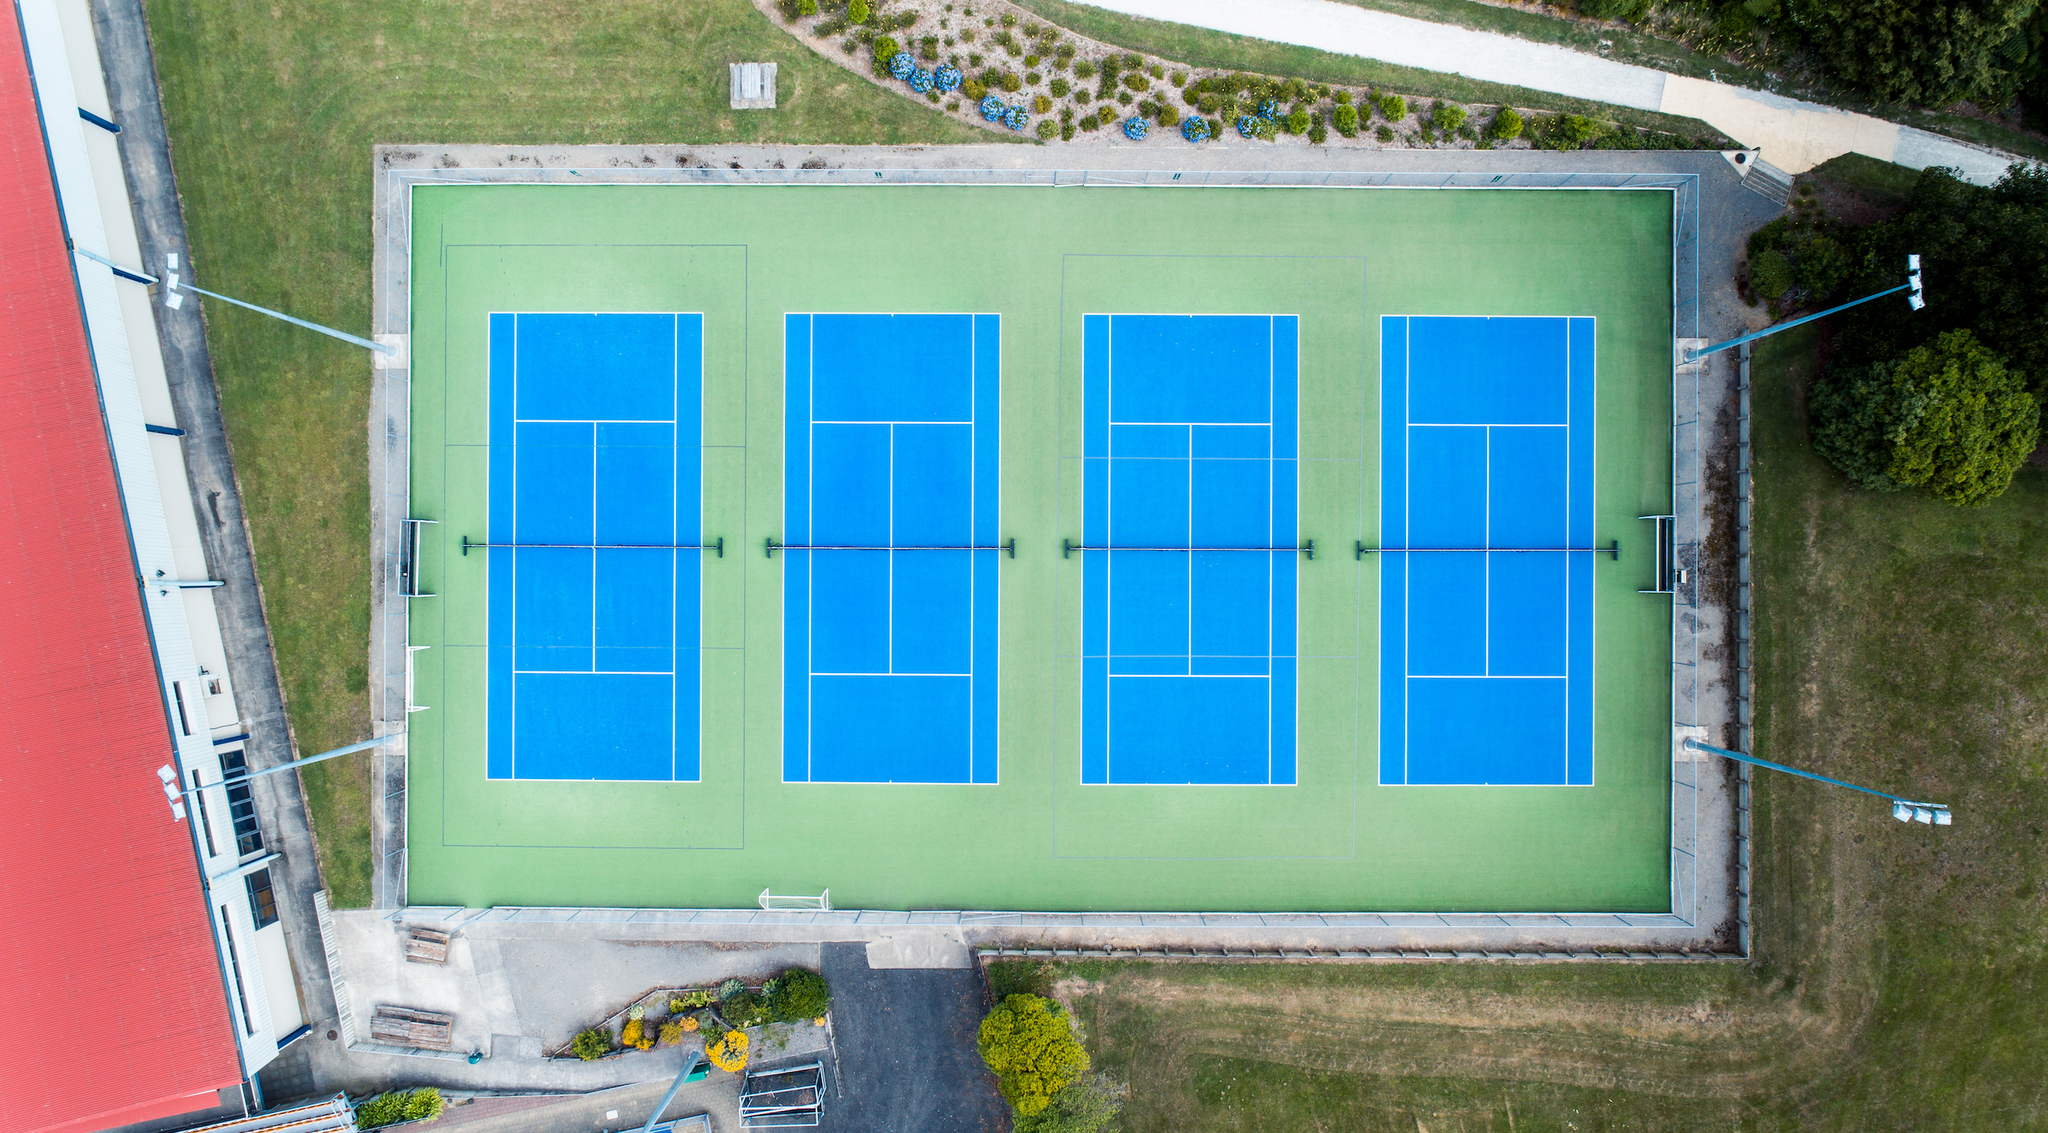 Drone image of bright blue and green tennis courts.